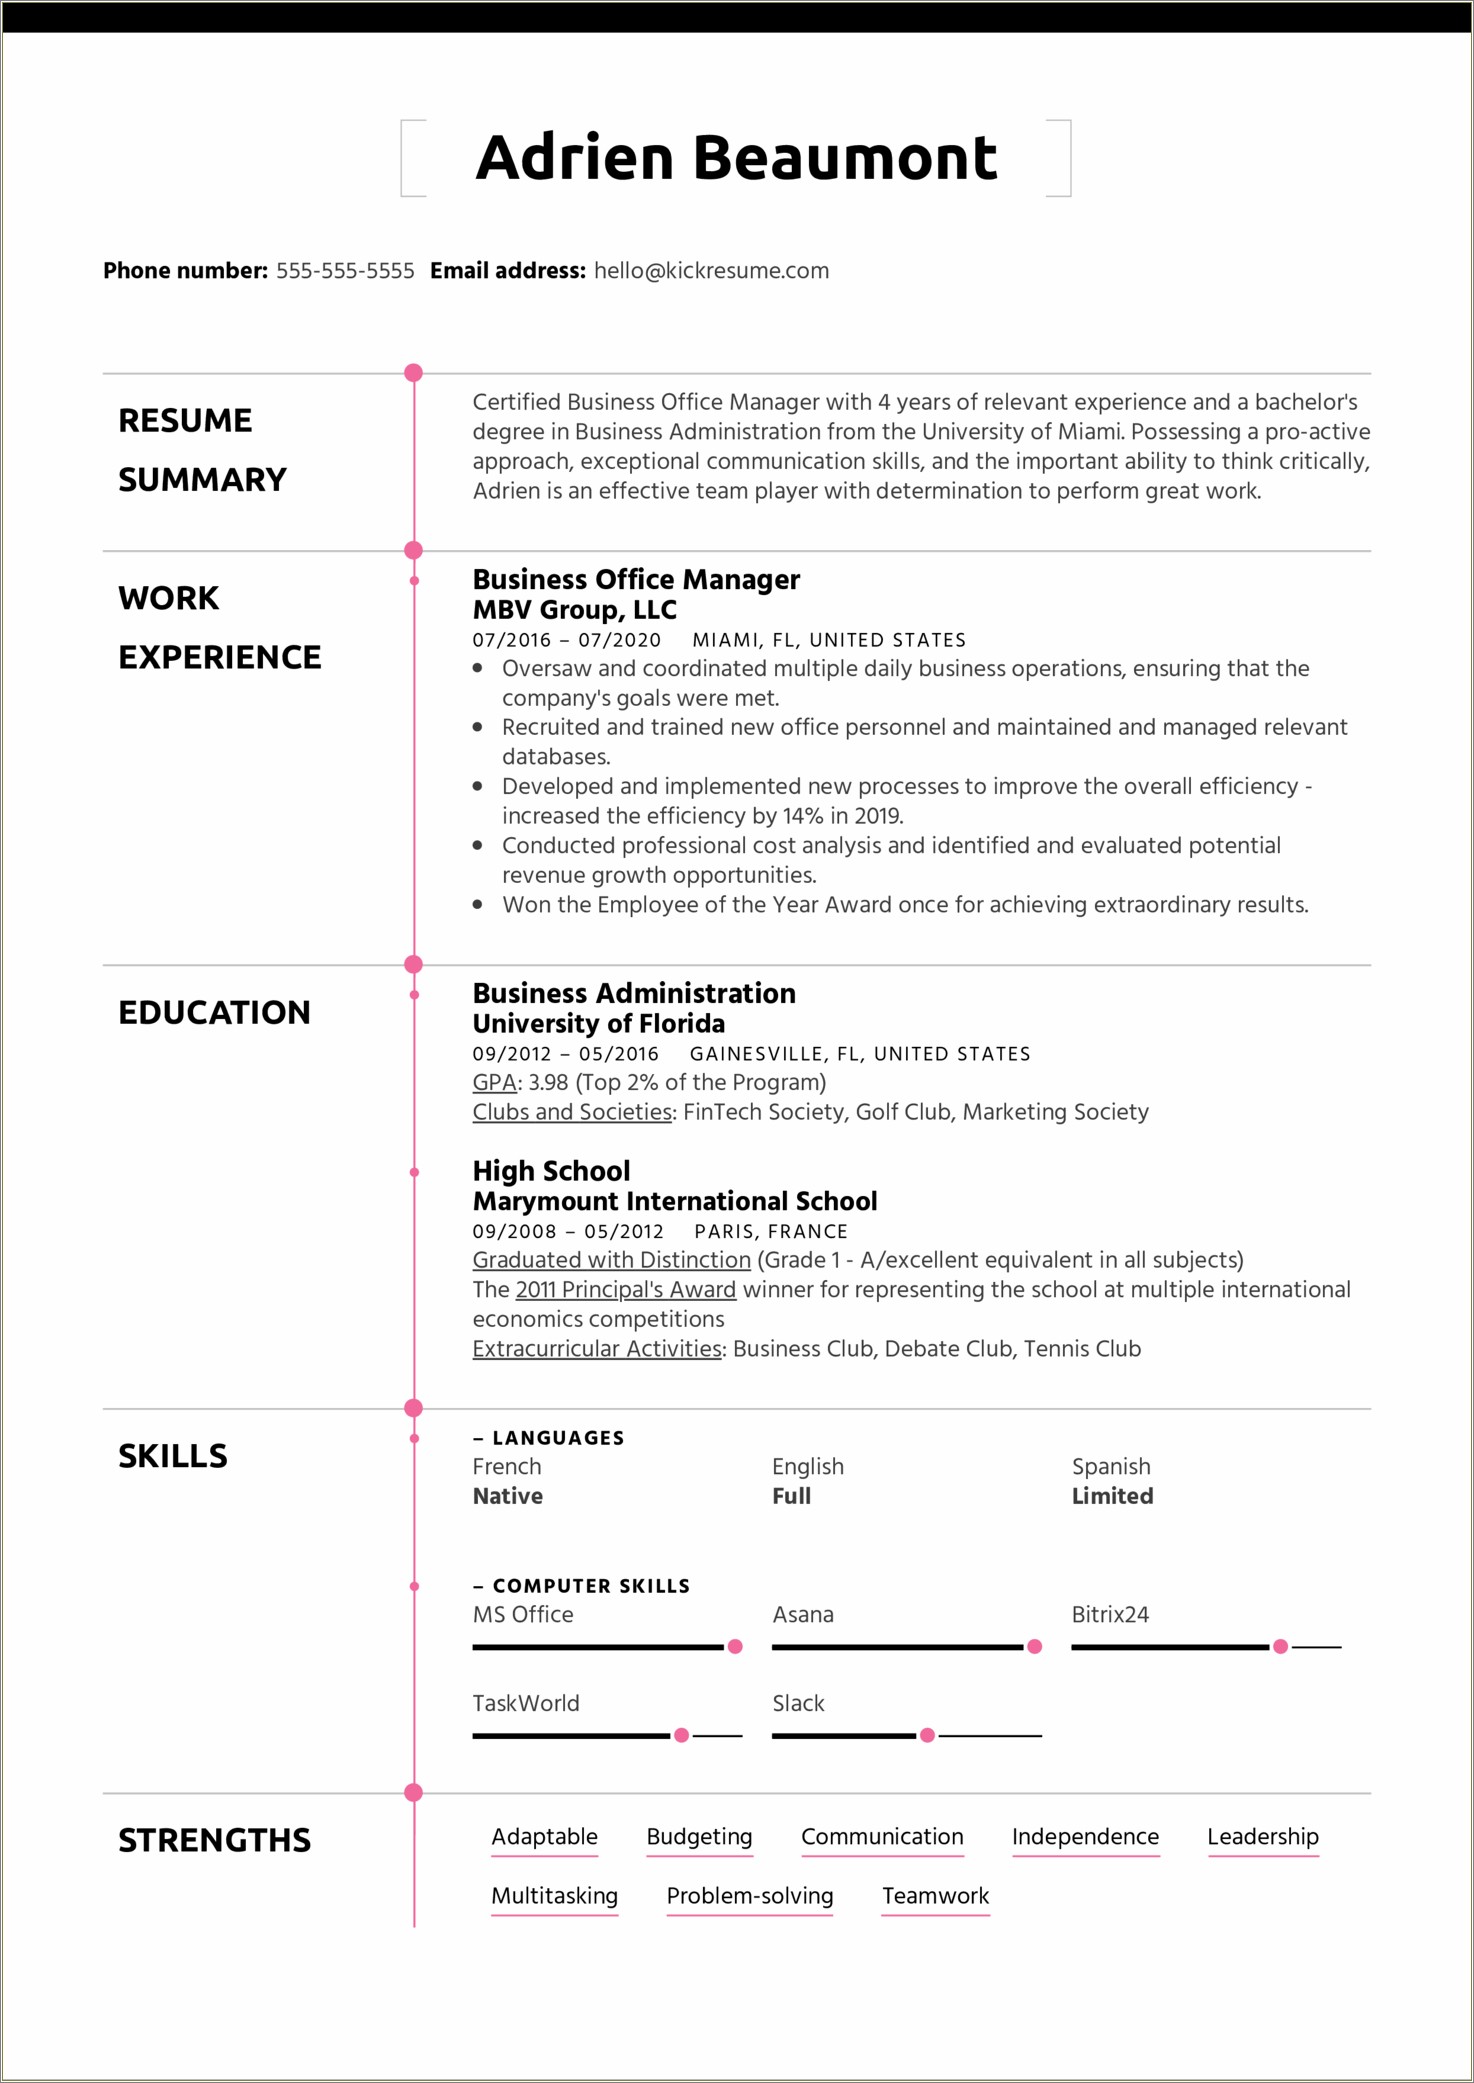 Resume Sample With Strengths And Weaknesses